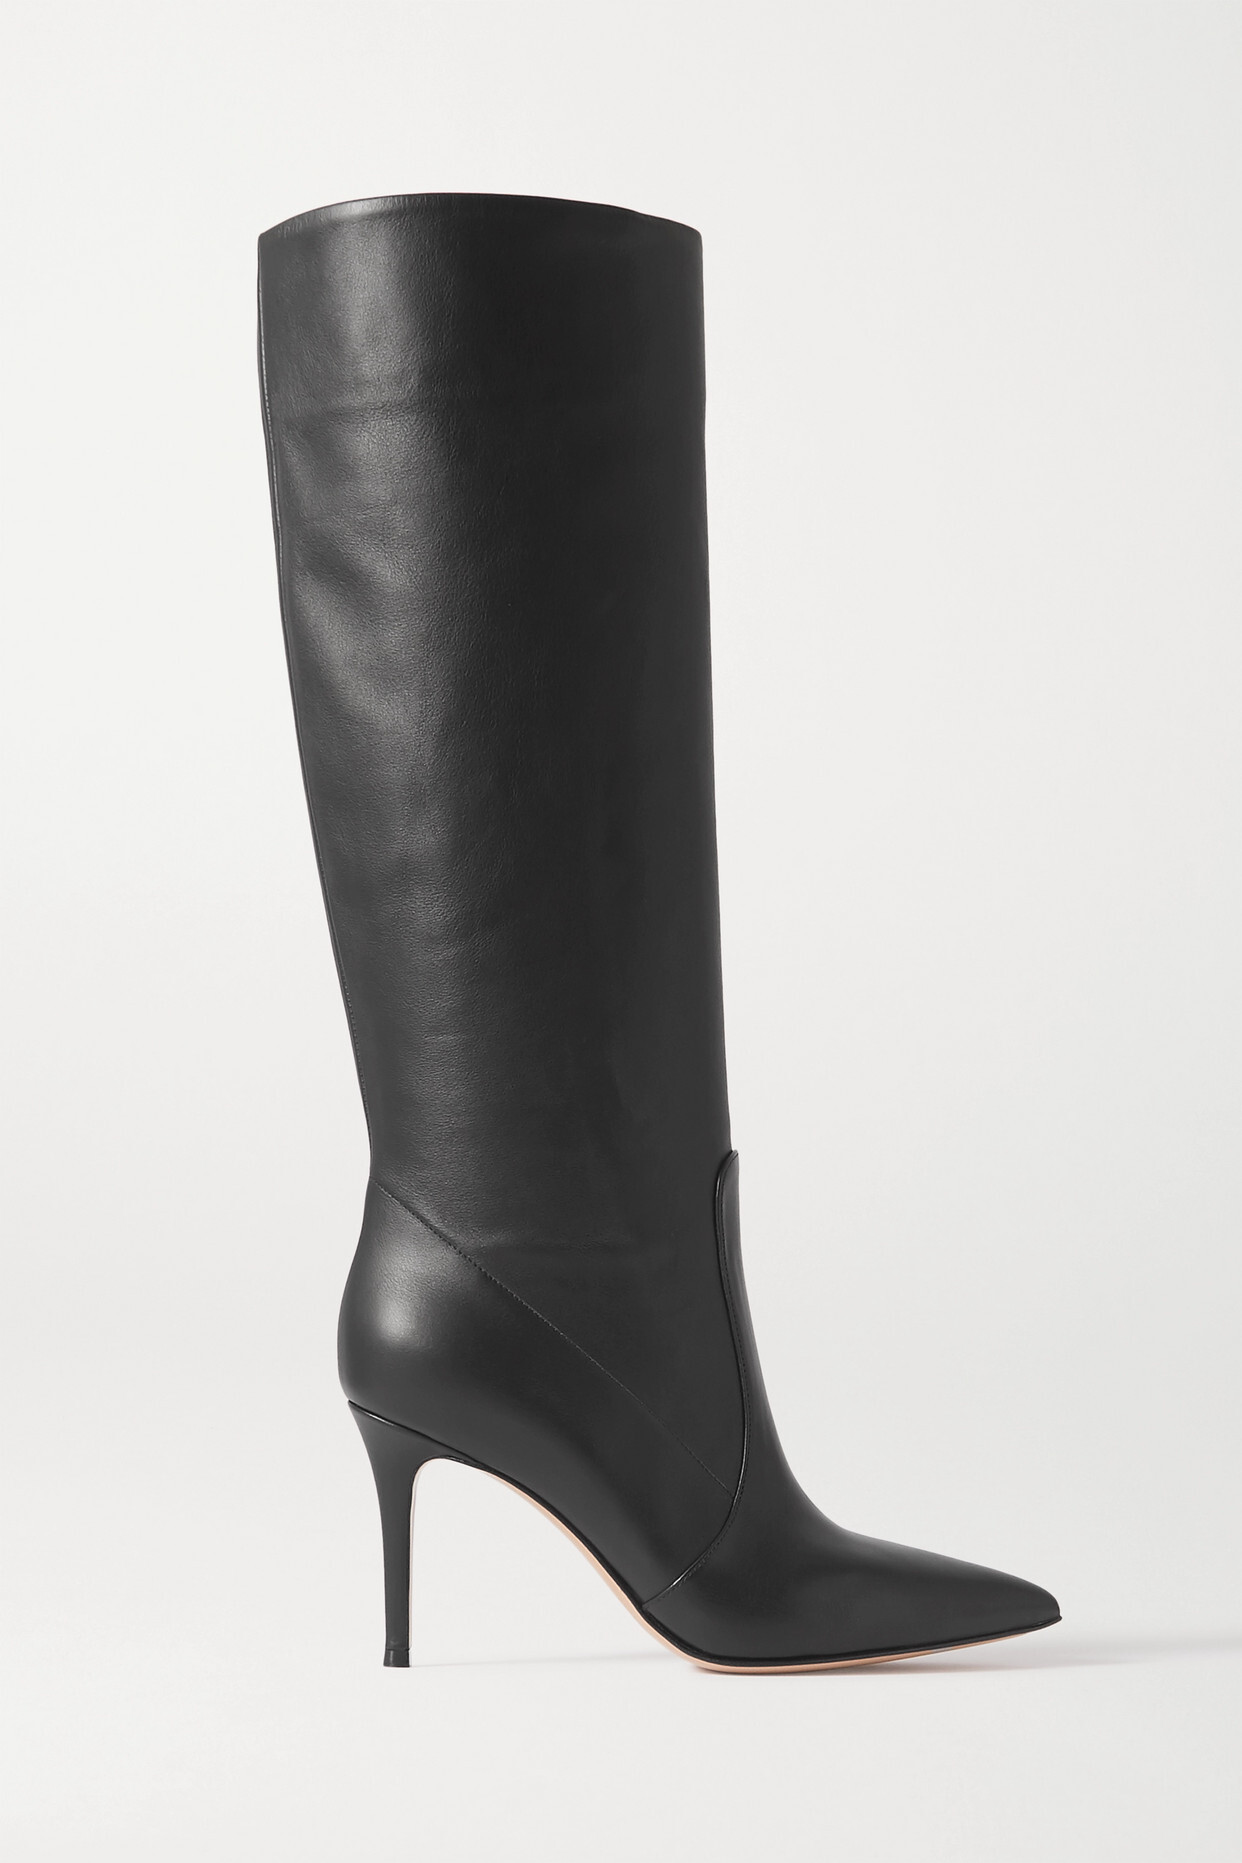 Gianvito Rossi - 85 Leather Knee Boots - Black